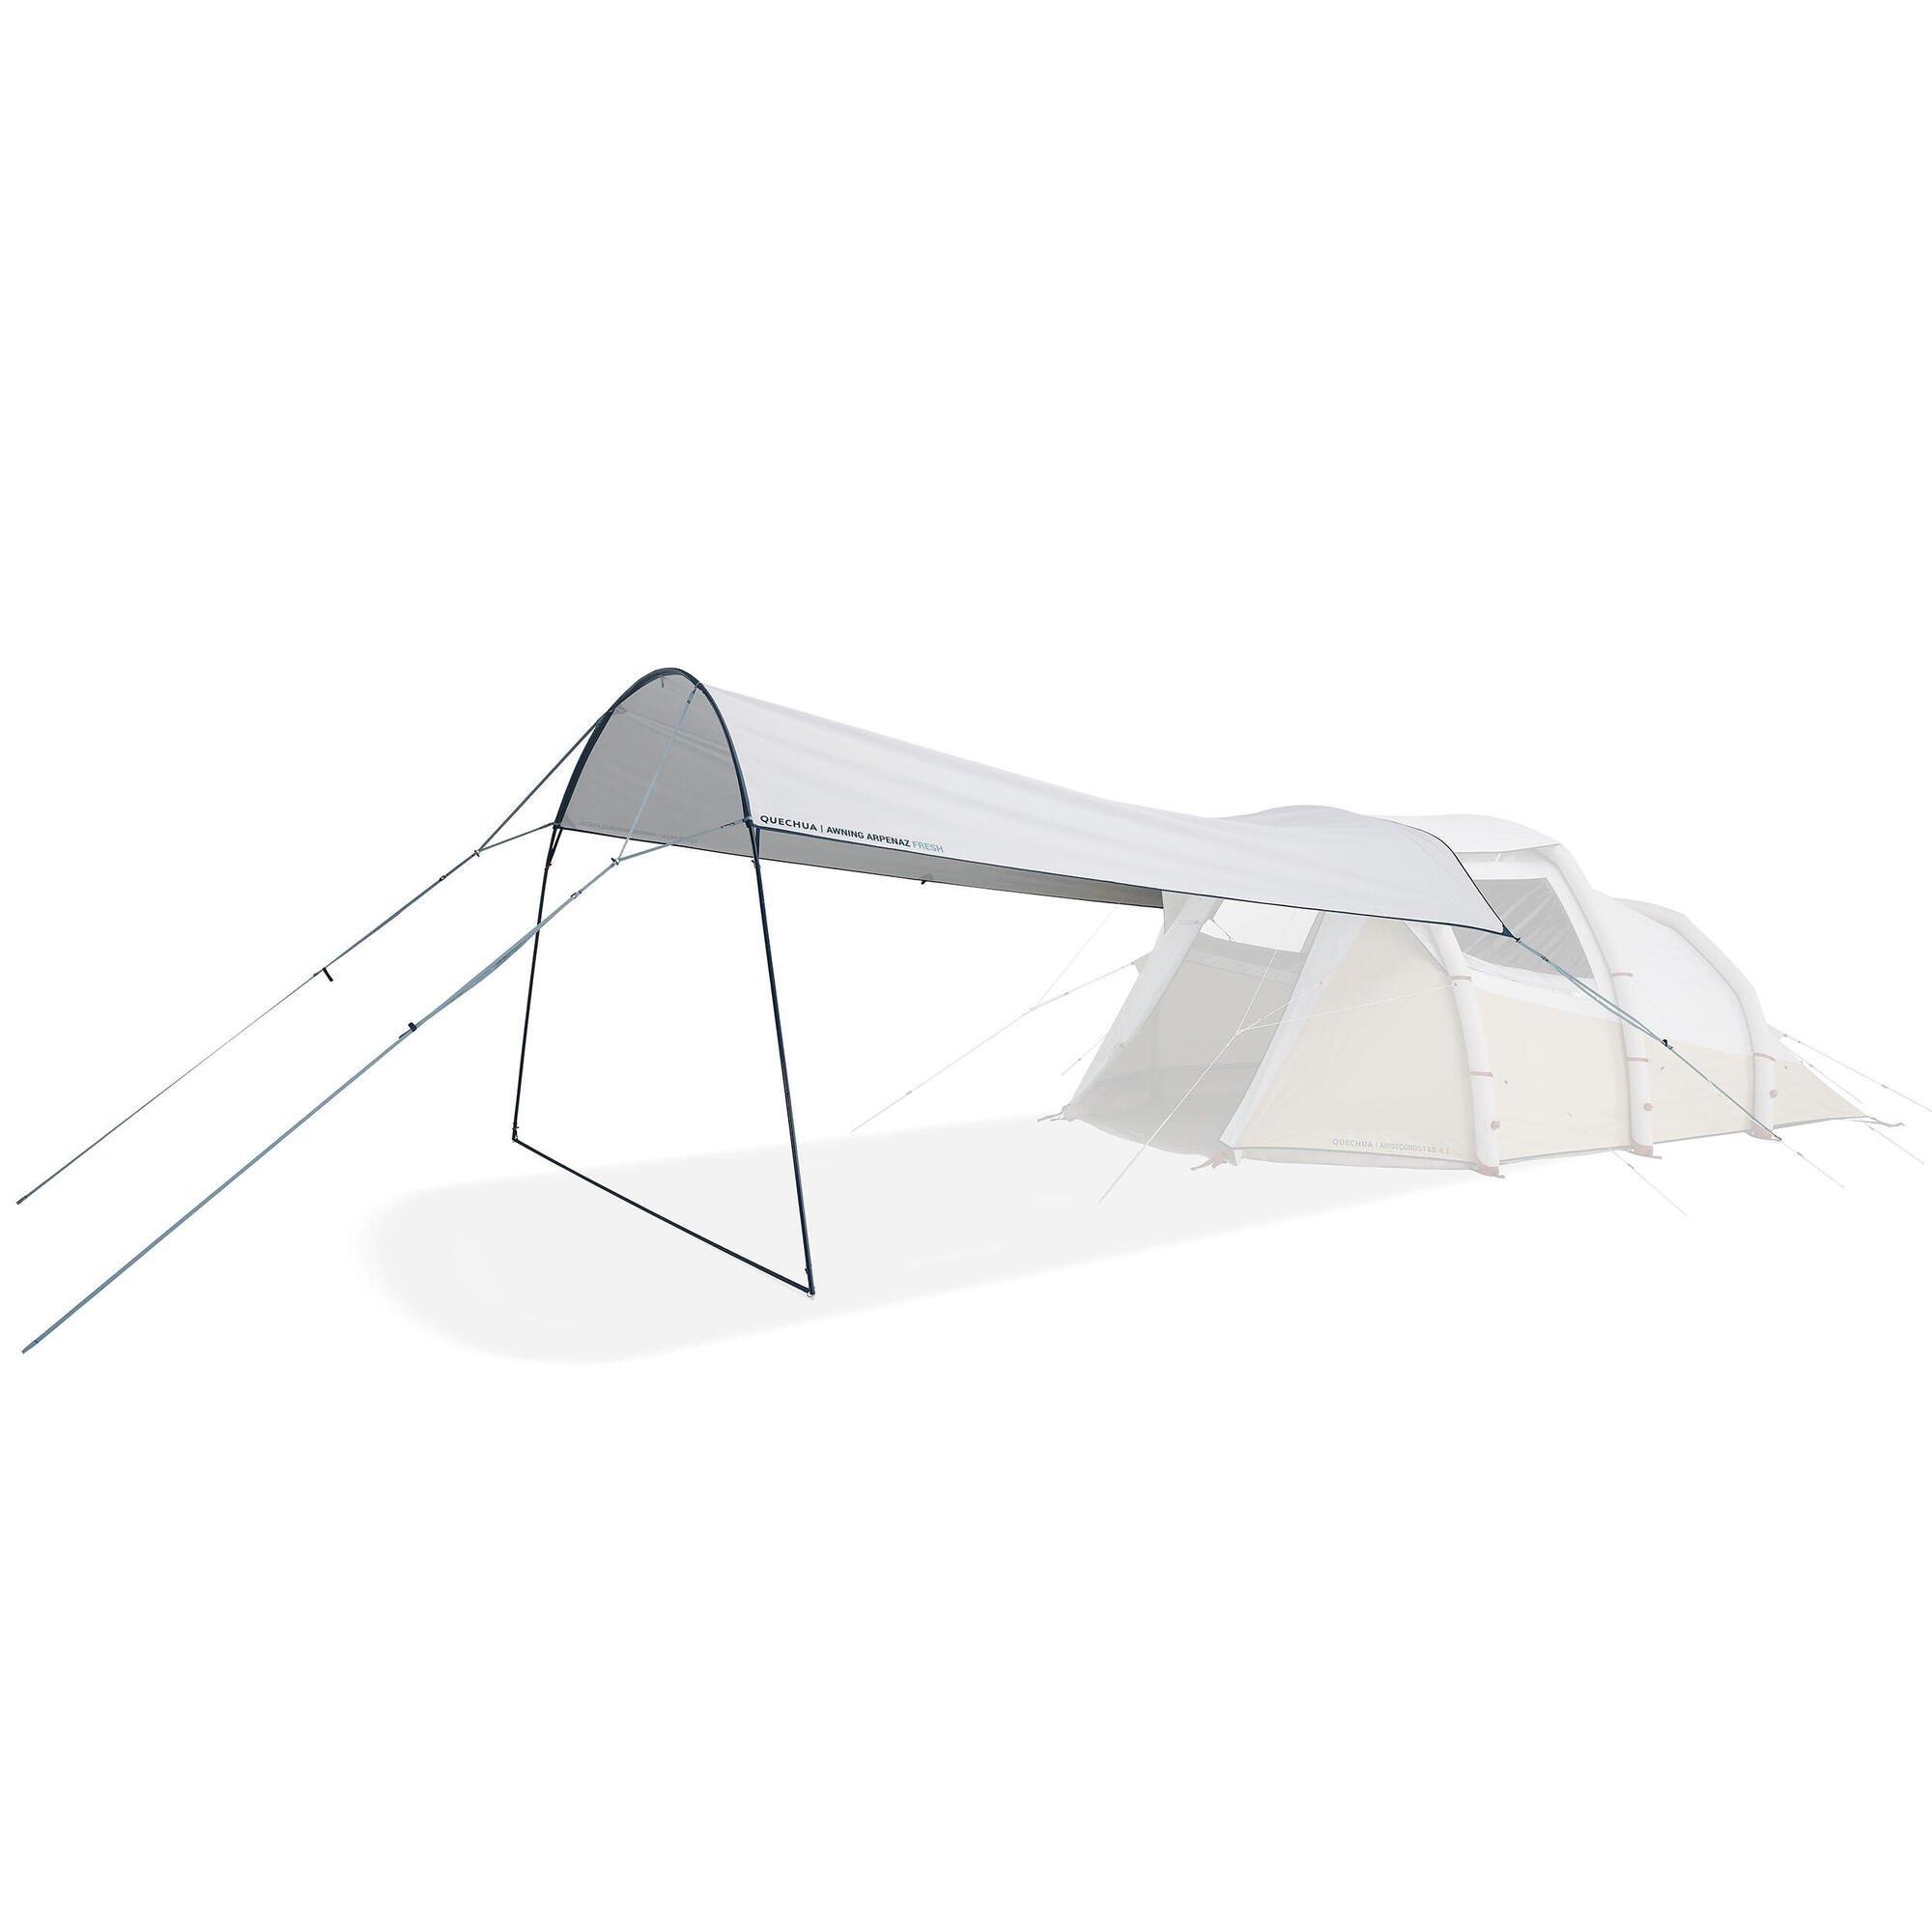 Decathlon Universal Tent Awning For Quechua Tents - Arpenaz Fresh